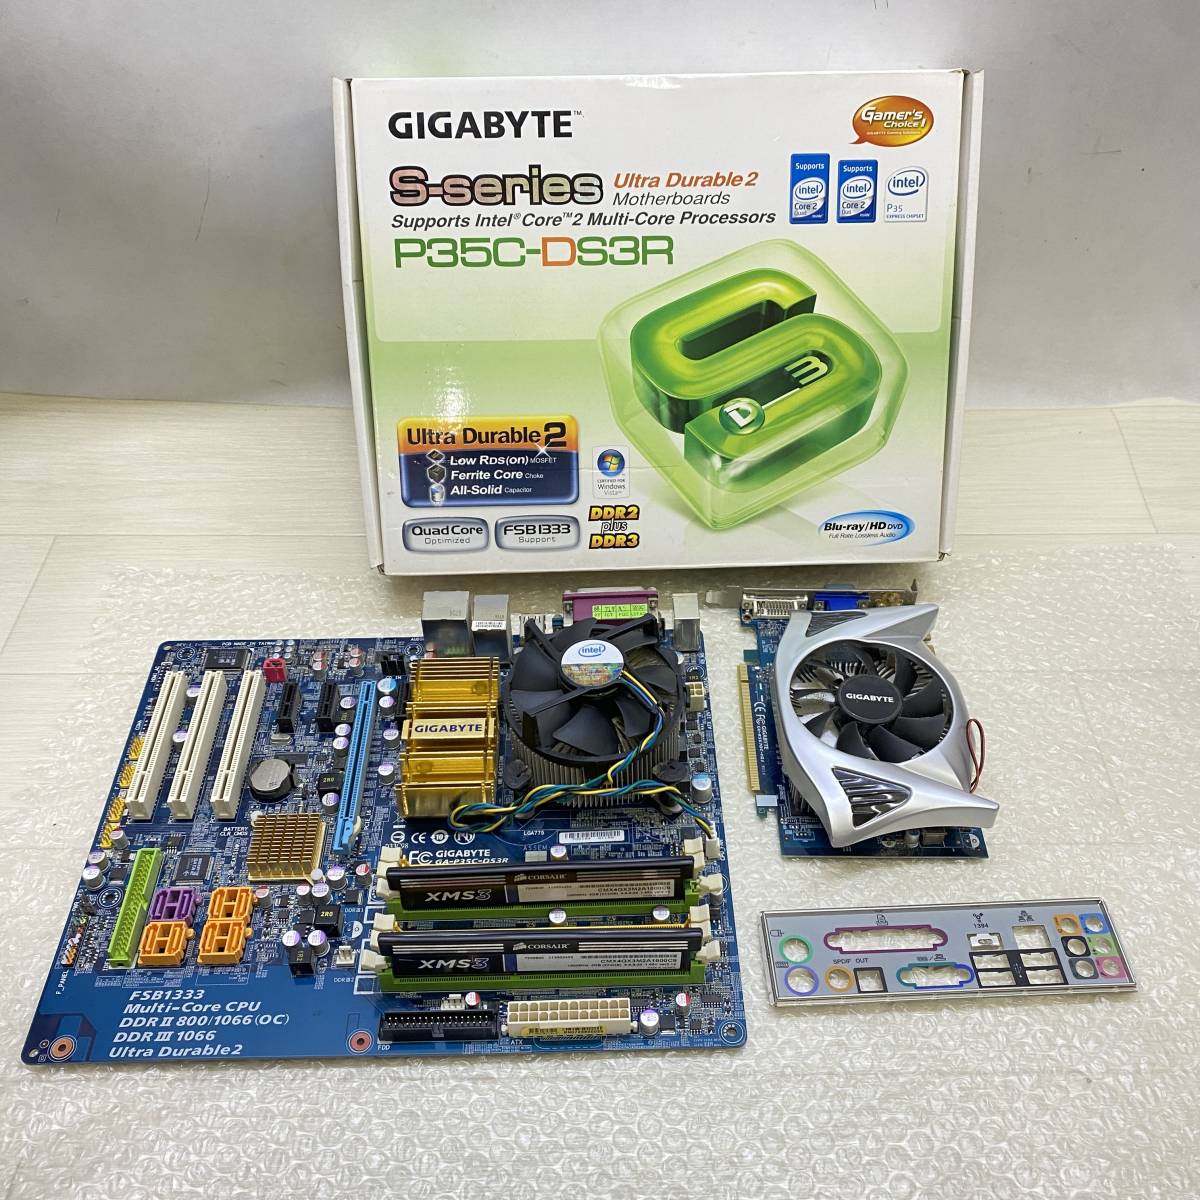 ^ GIGABYTE S-series P35C-DS3R FSB1333 motherboard personal computer peripherals operation not yet verification junk part removing ^ G12547